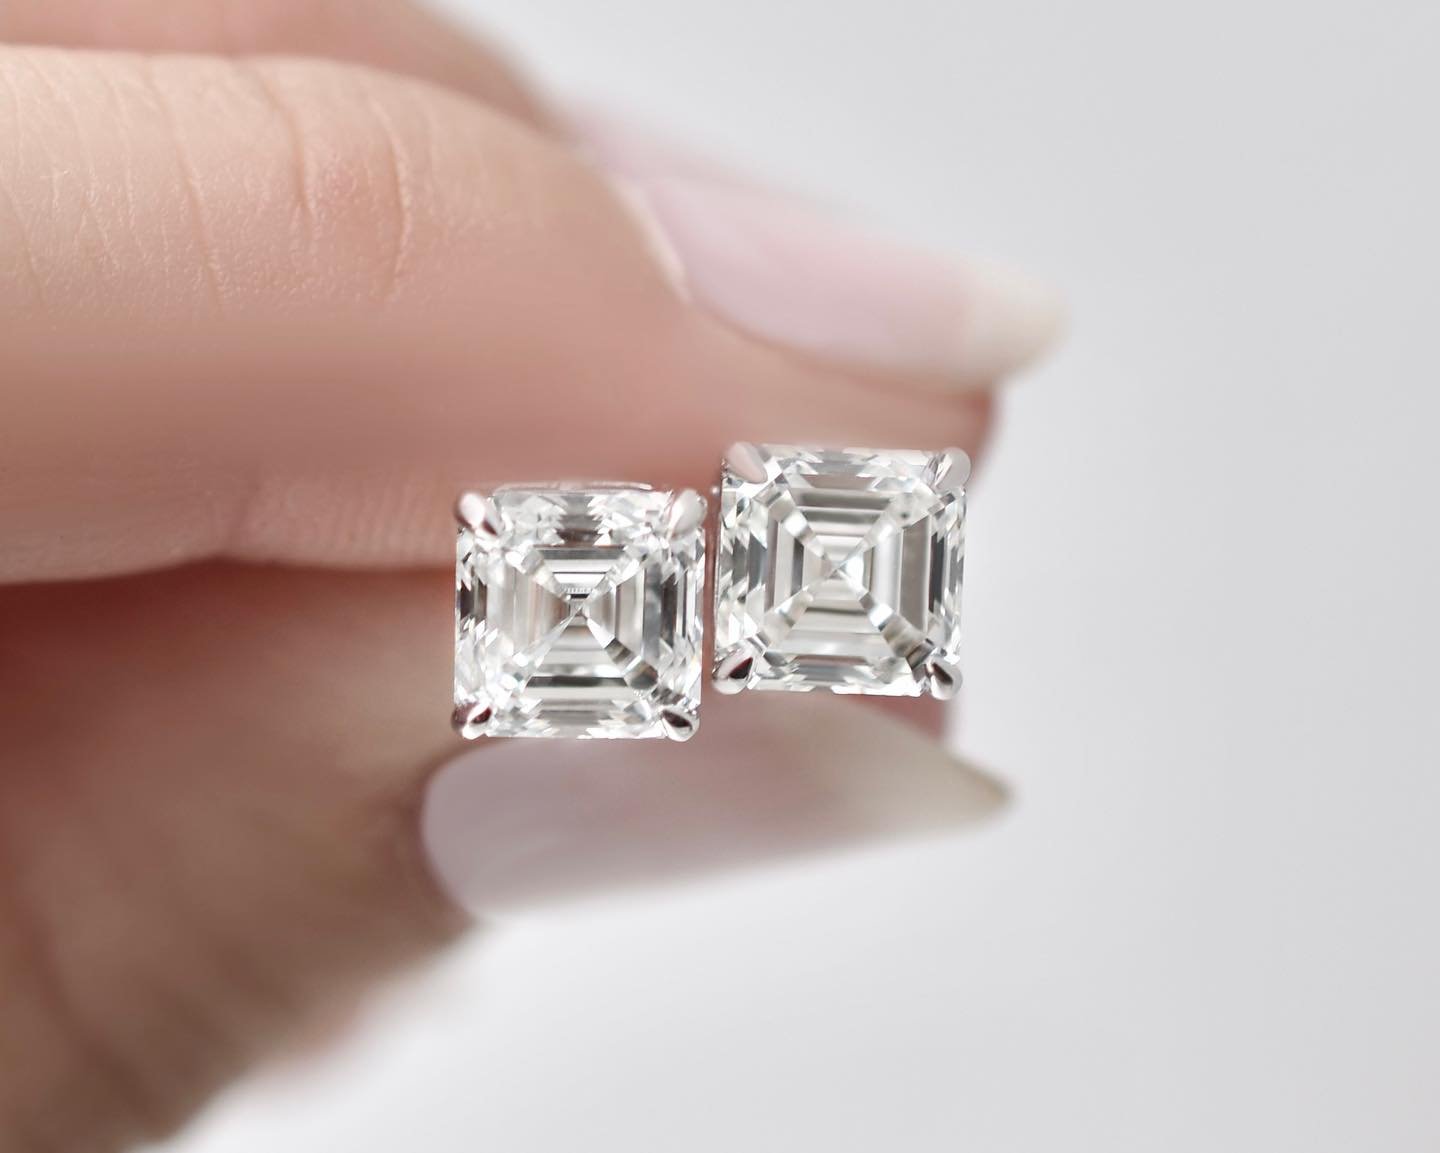 The Asscher Cut diamond combines the art deco flair of the Emerald Cut that we all love with the symmetrical feeling of Round diamonds 💎

It is truly the best of both worlds for a timeless custom piece if you ask us 😉